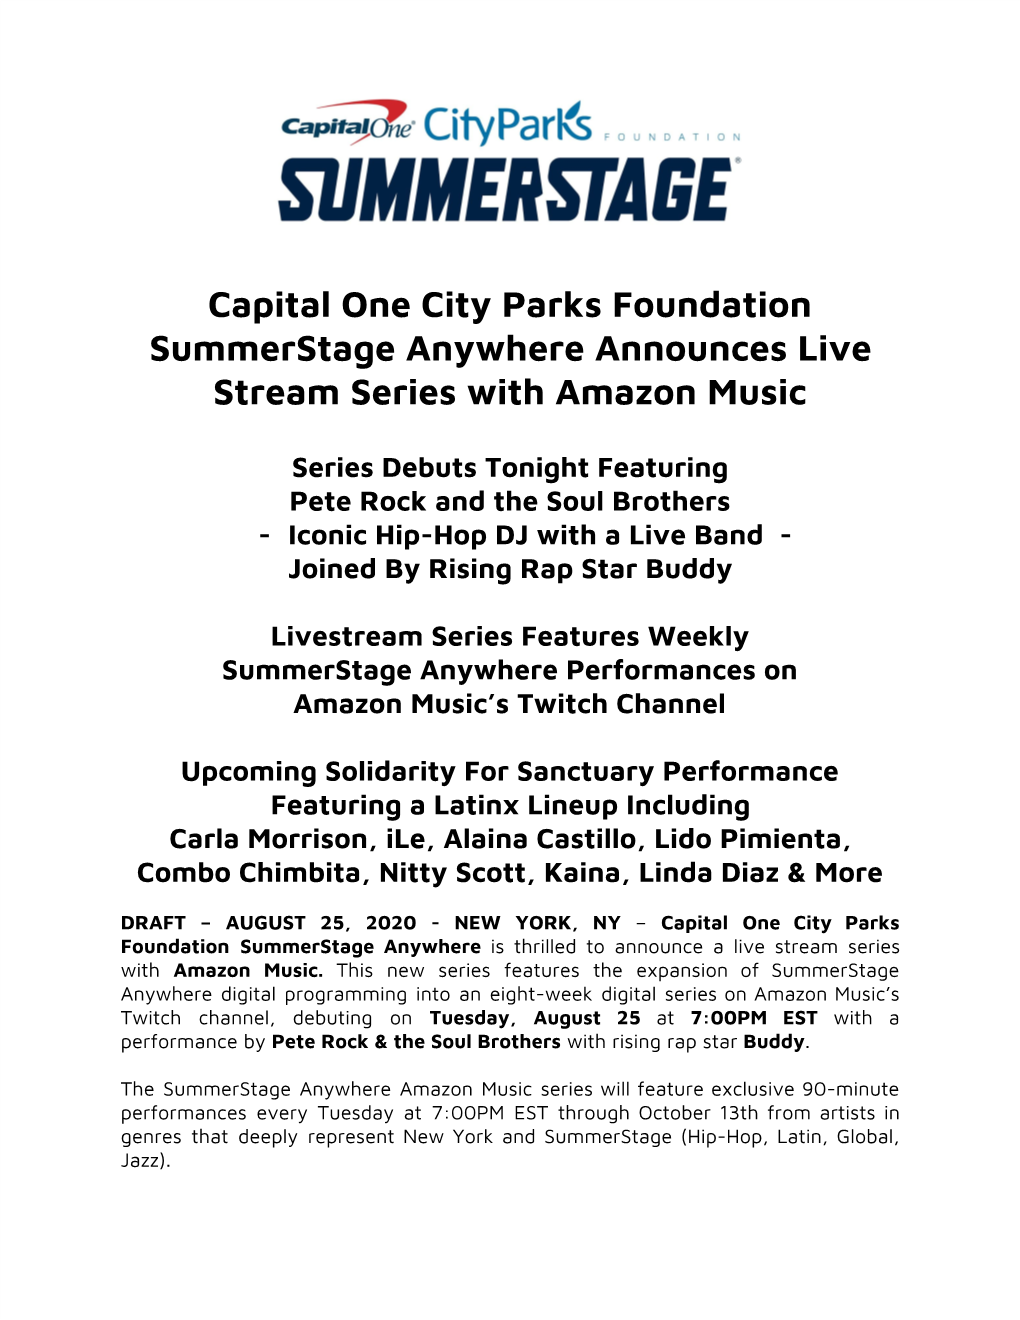 Capital One City Parks Foundation Summerstage Anywhere Announces Live Stream Series with Amazon Music